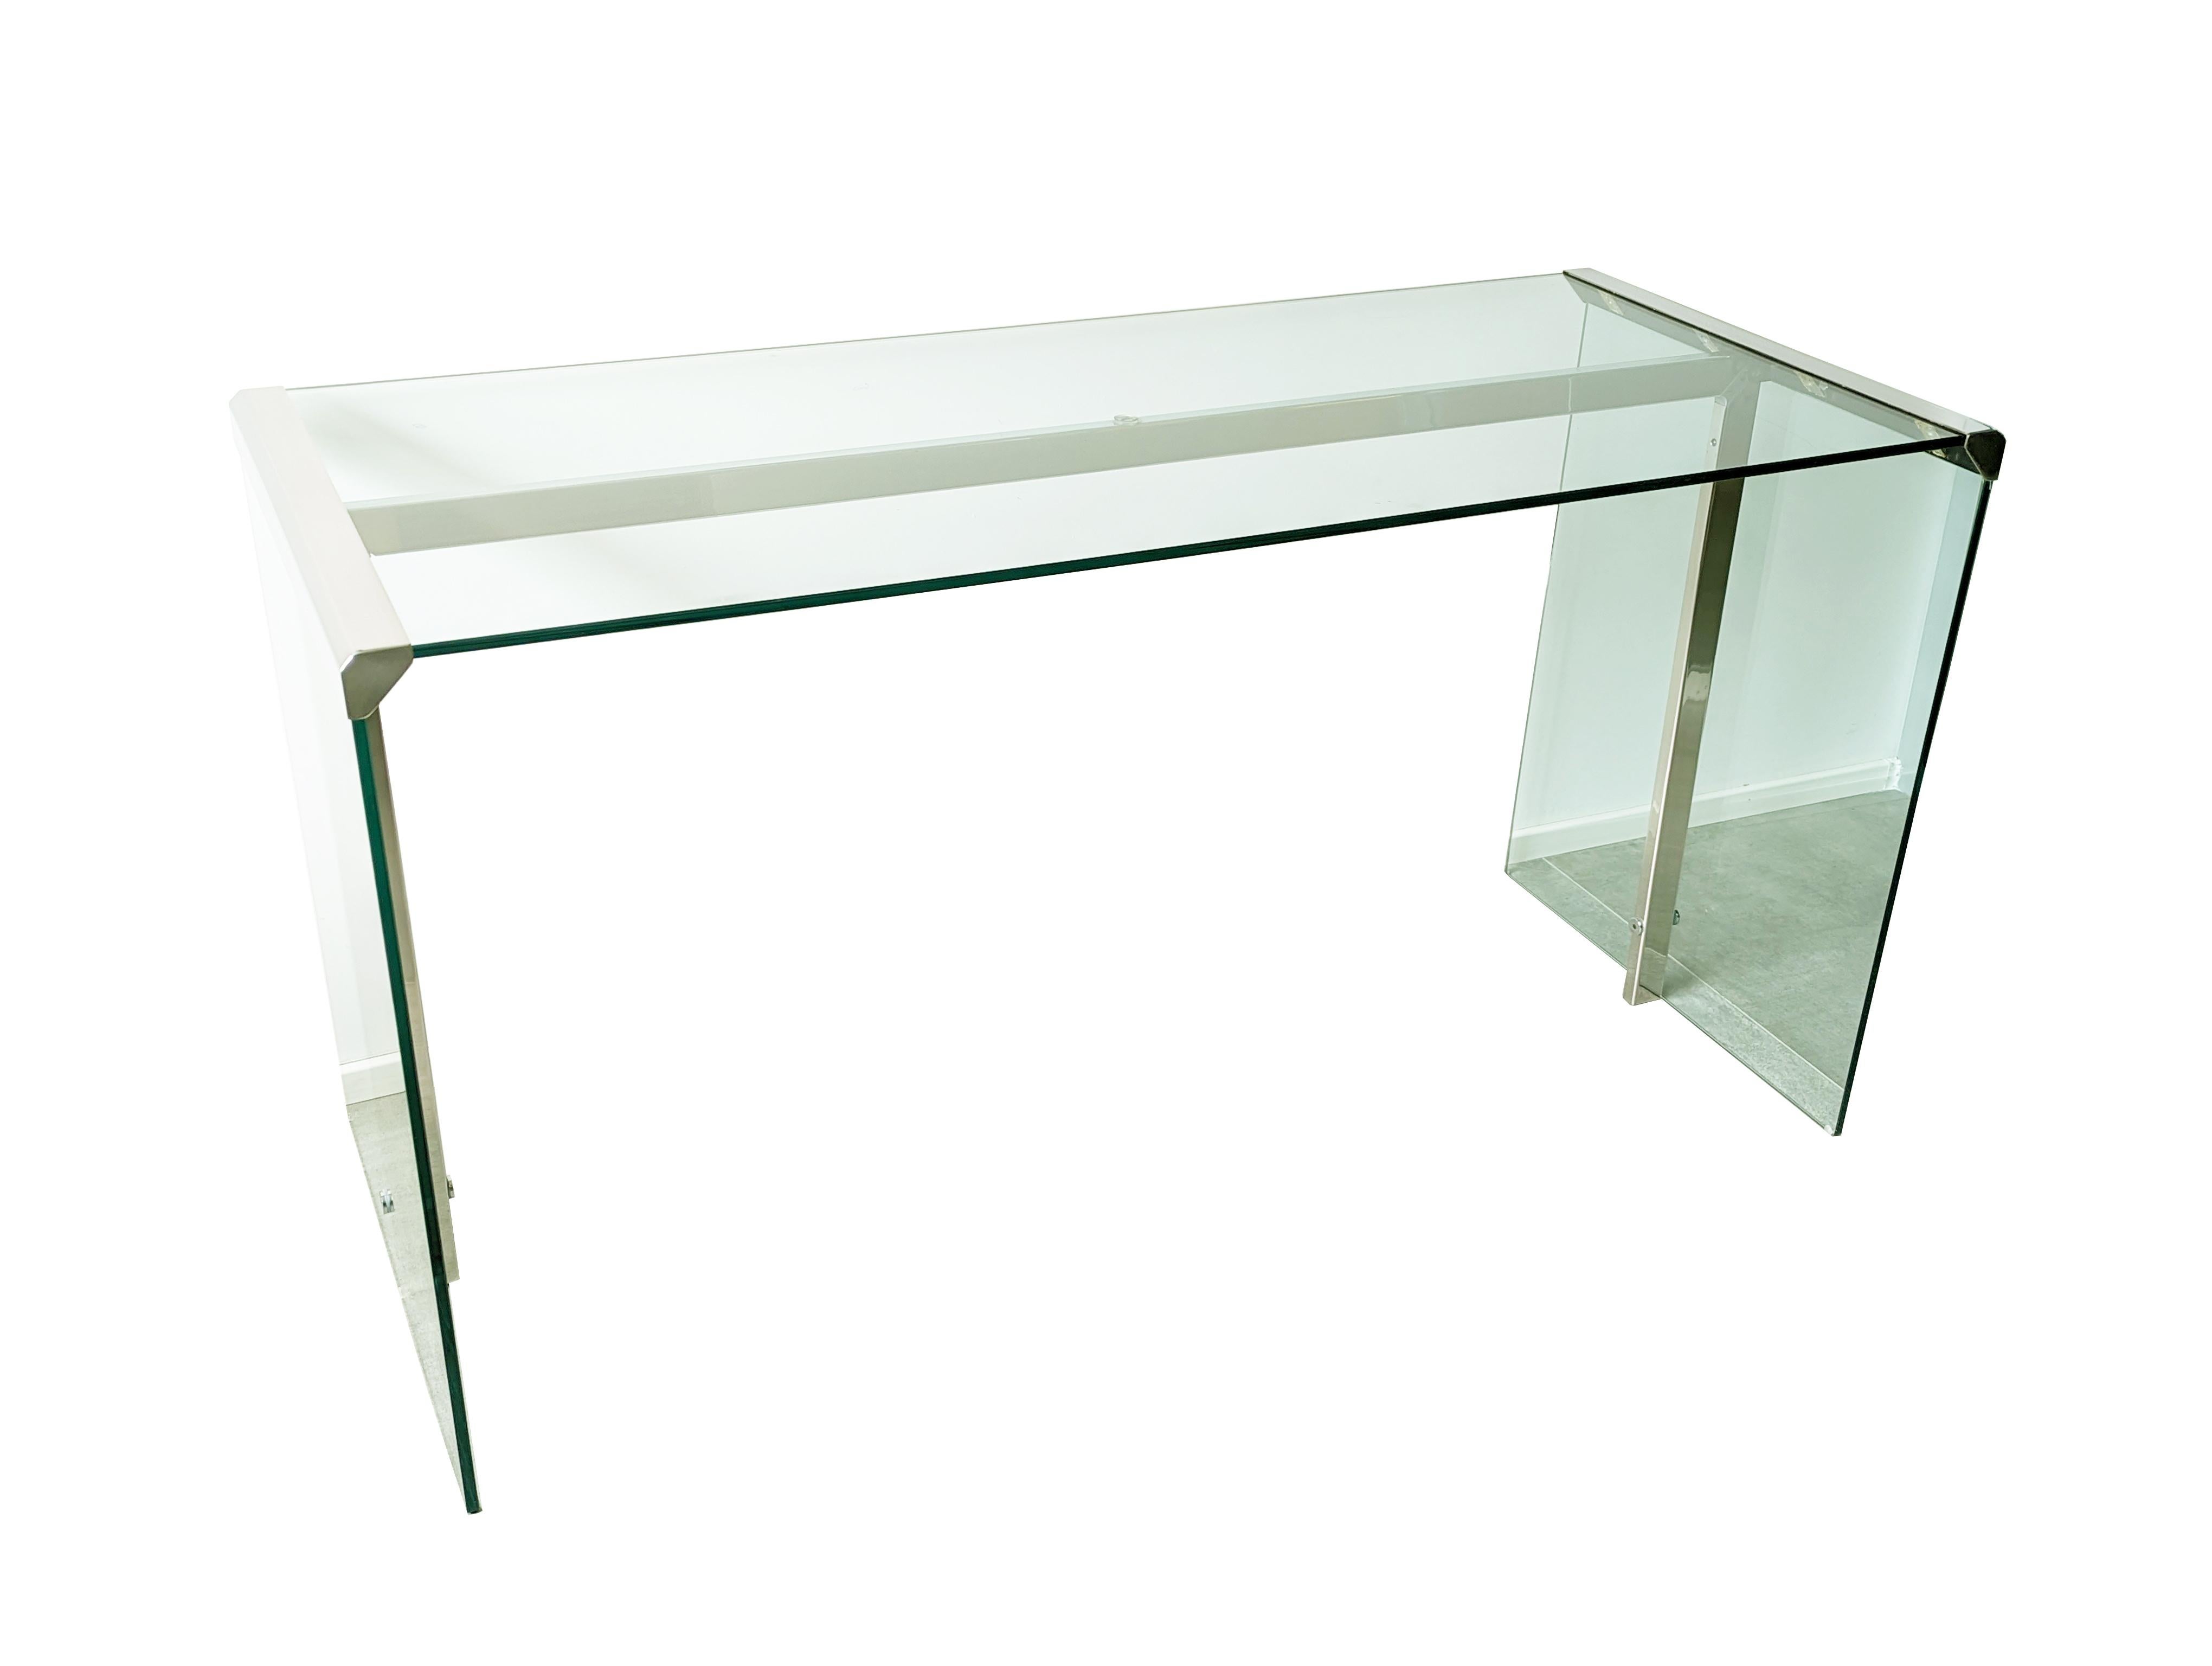 Italian Glass, Painted wood & Chrome Plated Metal 1990s desk by Gallotti e Radice For Sale